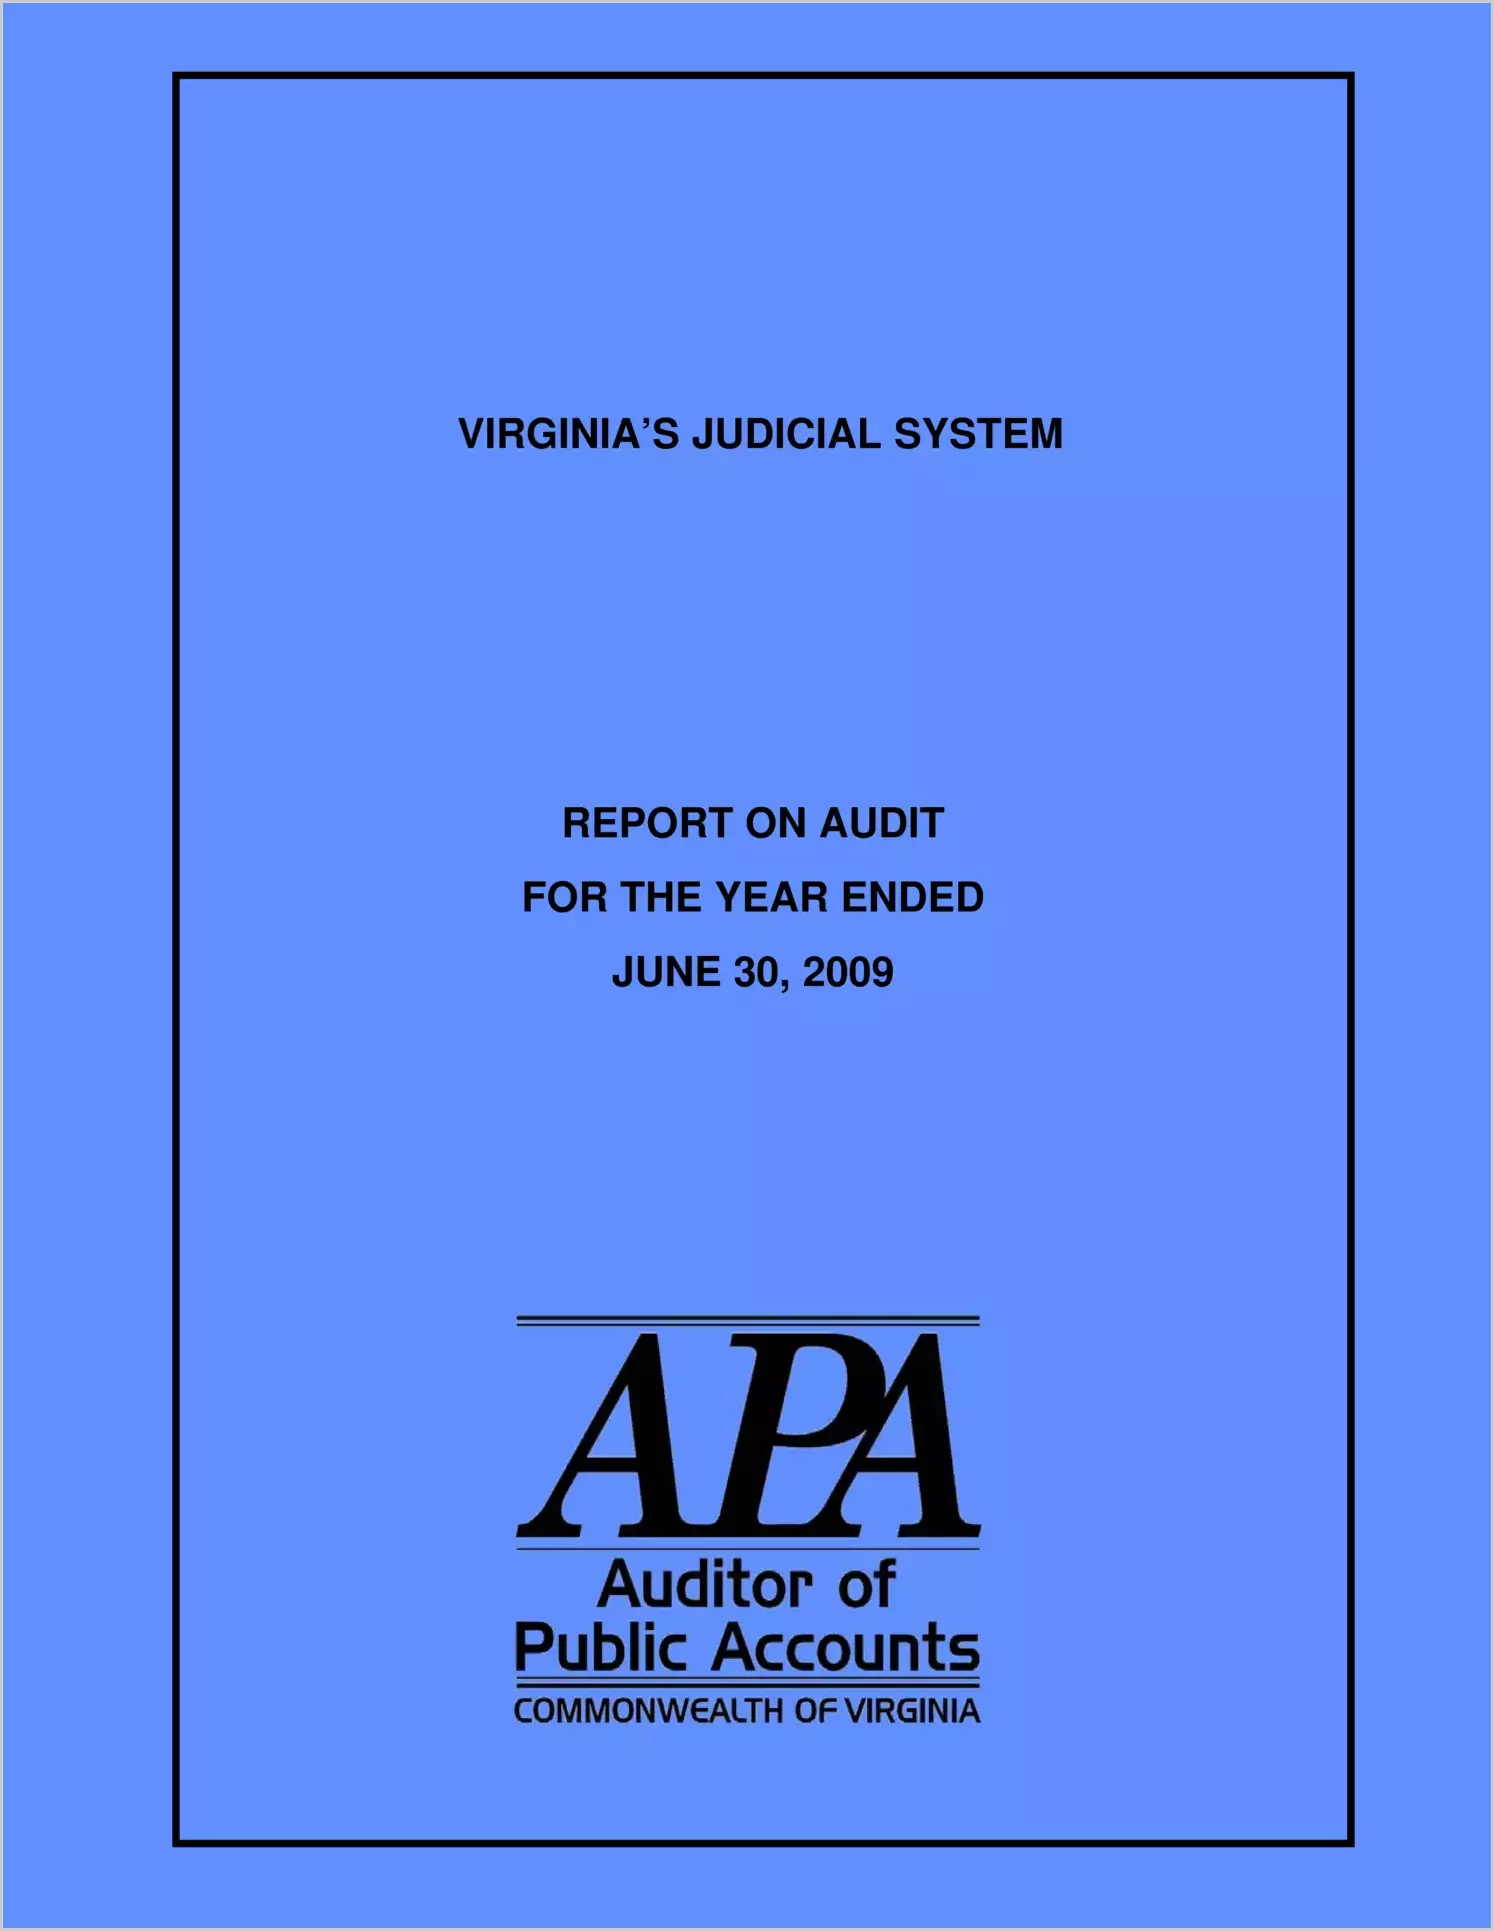 Virginia's Judicial System for the year ended June 30, 2009